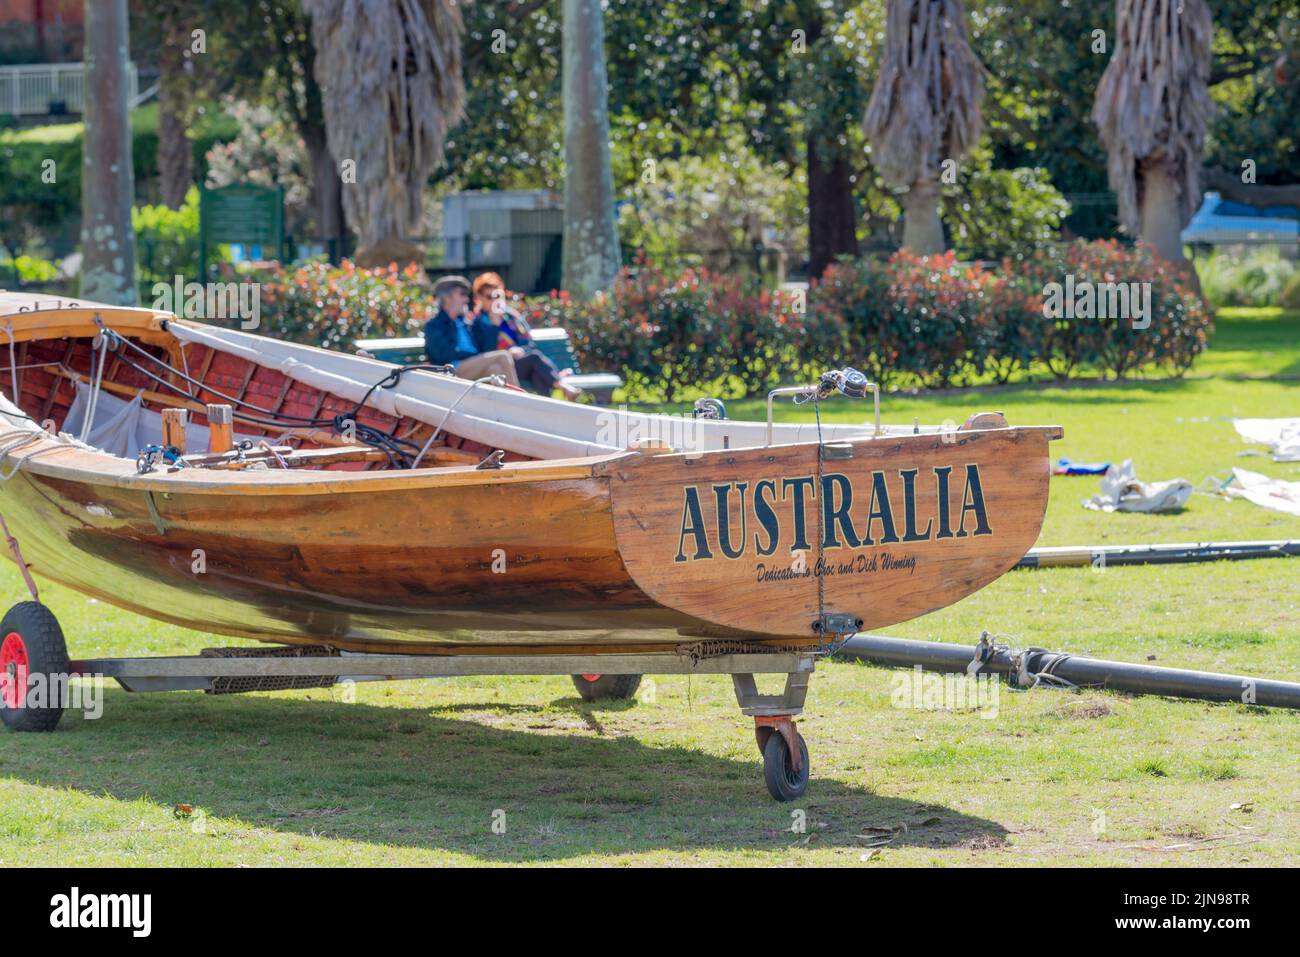 Part of the Sydney Flying Squadron, open boat club in Kirribilli, Sydney, formed in 1891, 'Australia' is a traditional wooden 18ft skiff racing boat Stock Photo